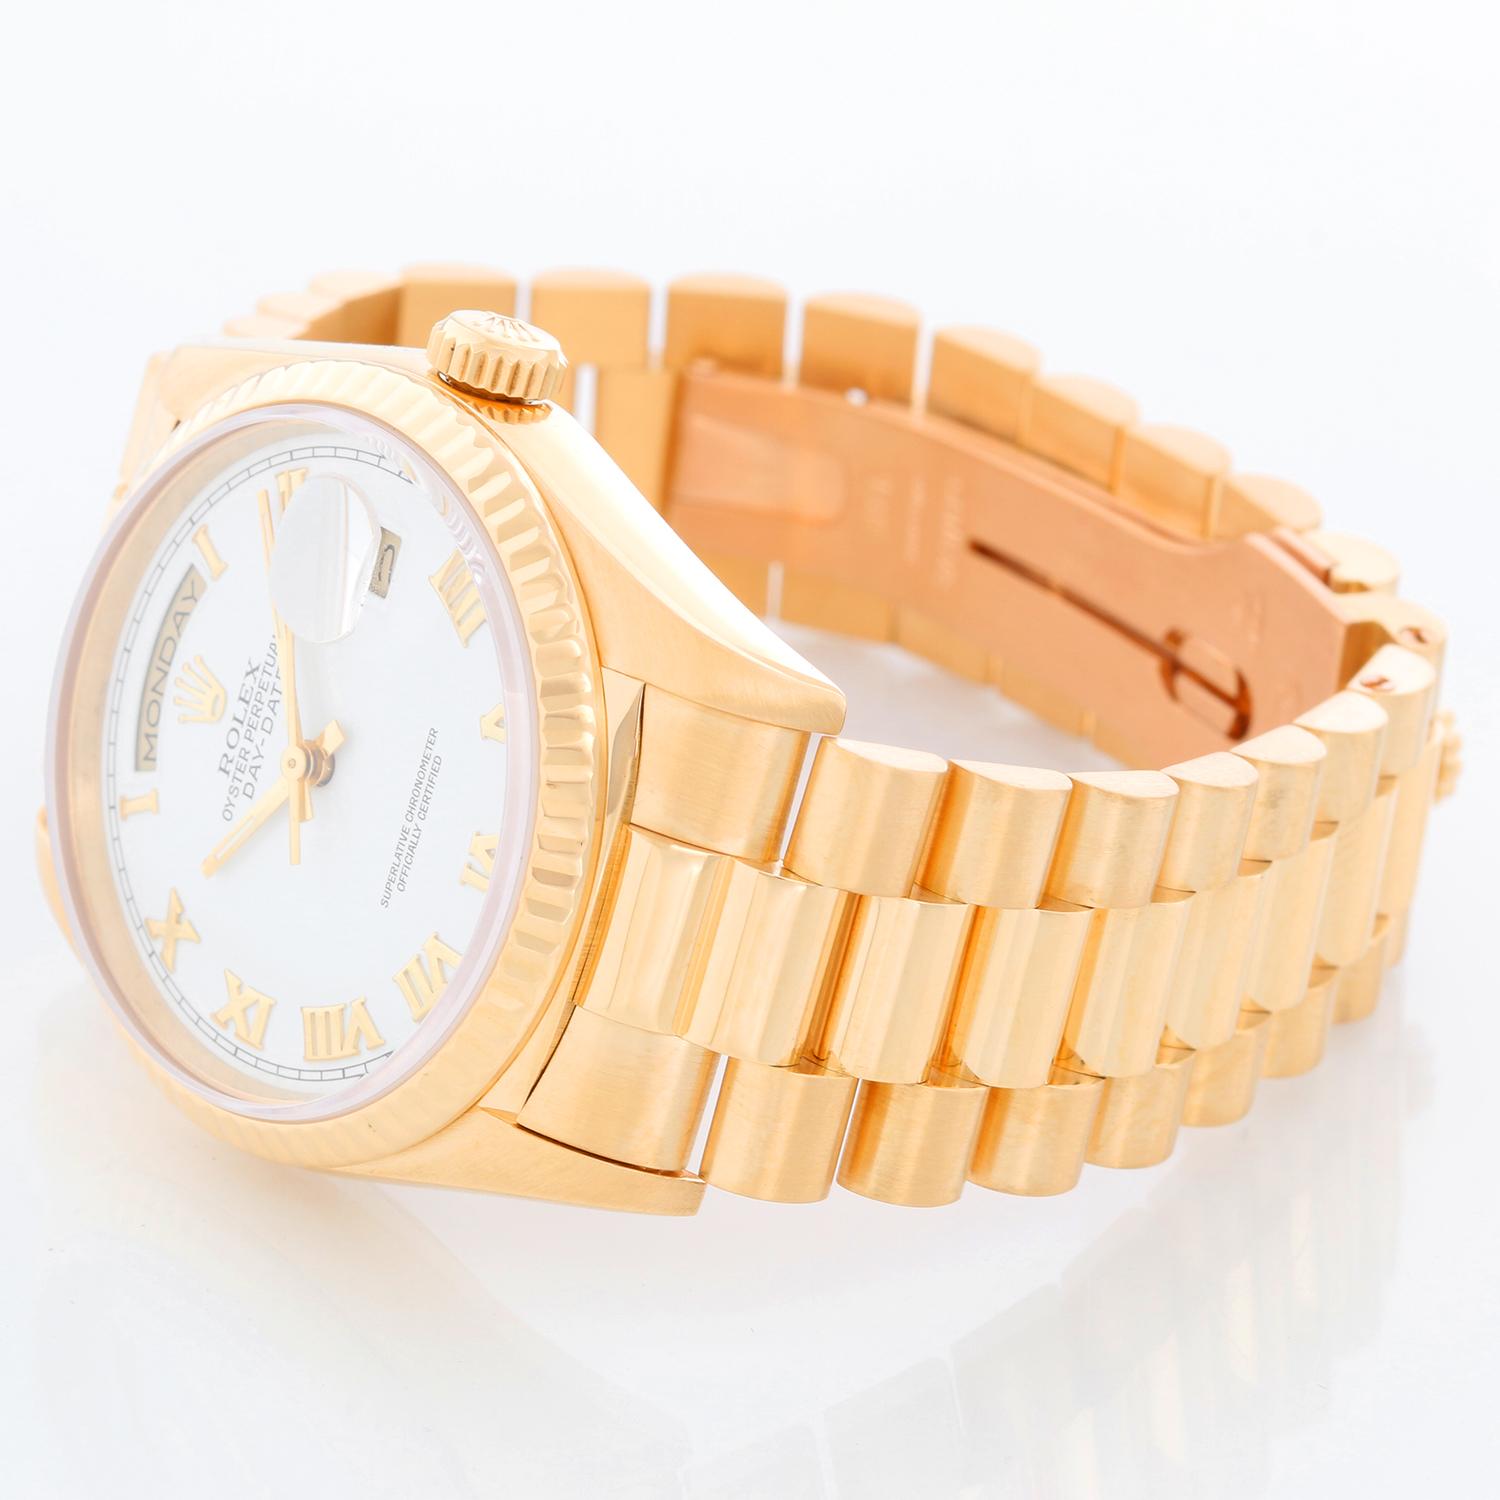 Men's Gold Rolex President Day-Date Watch 18238 - Automatic winding, 31 jewels, double Quickset, sapphire crystal. 18k yellow gold case and fluted bezel (36mm diameter). White dial with Roman numerals . 18k yellow gold President bracelet. Pre-owned